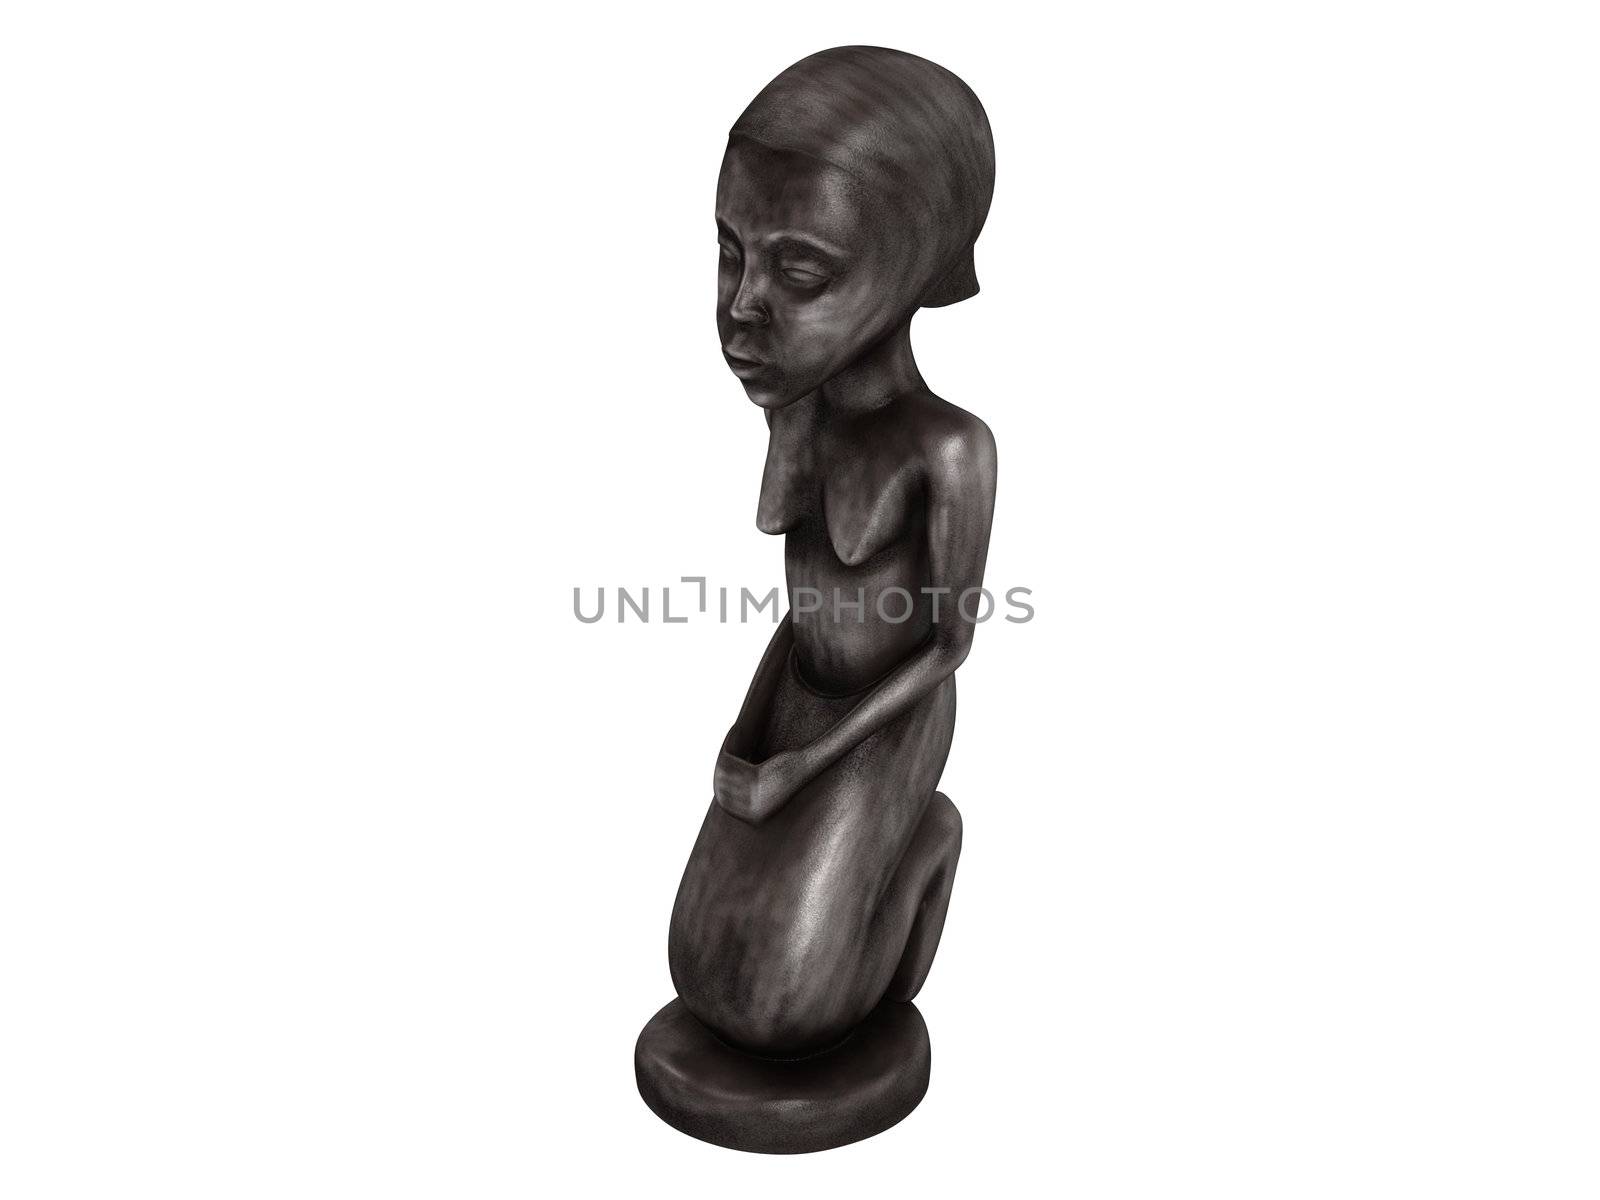 Old african statuette isolated on white background